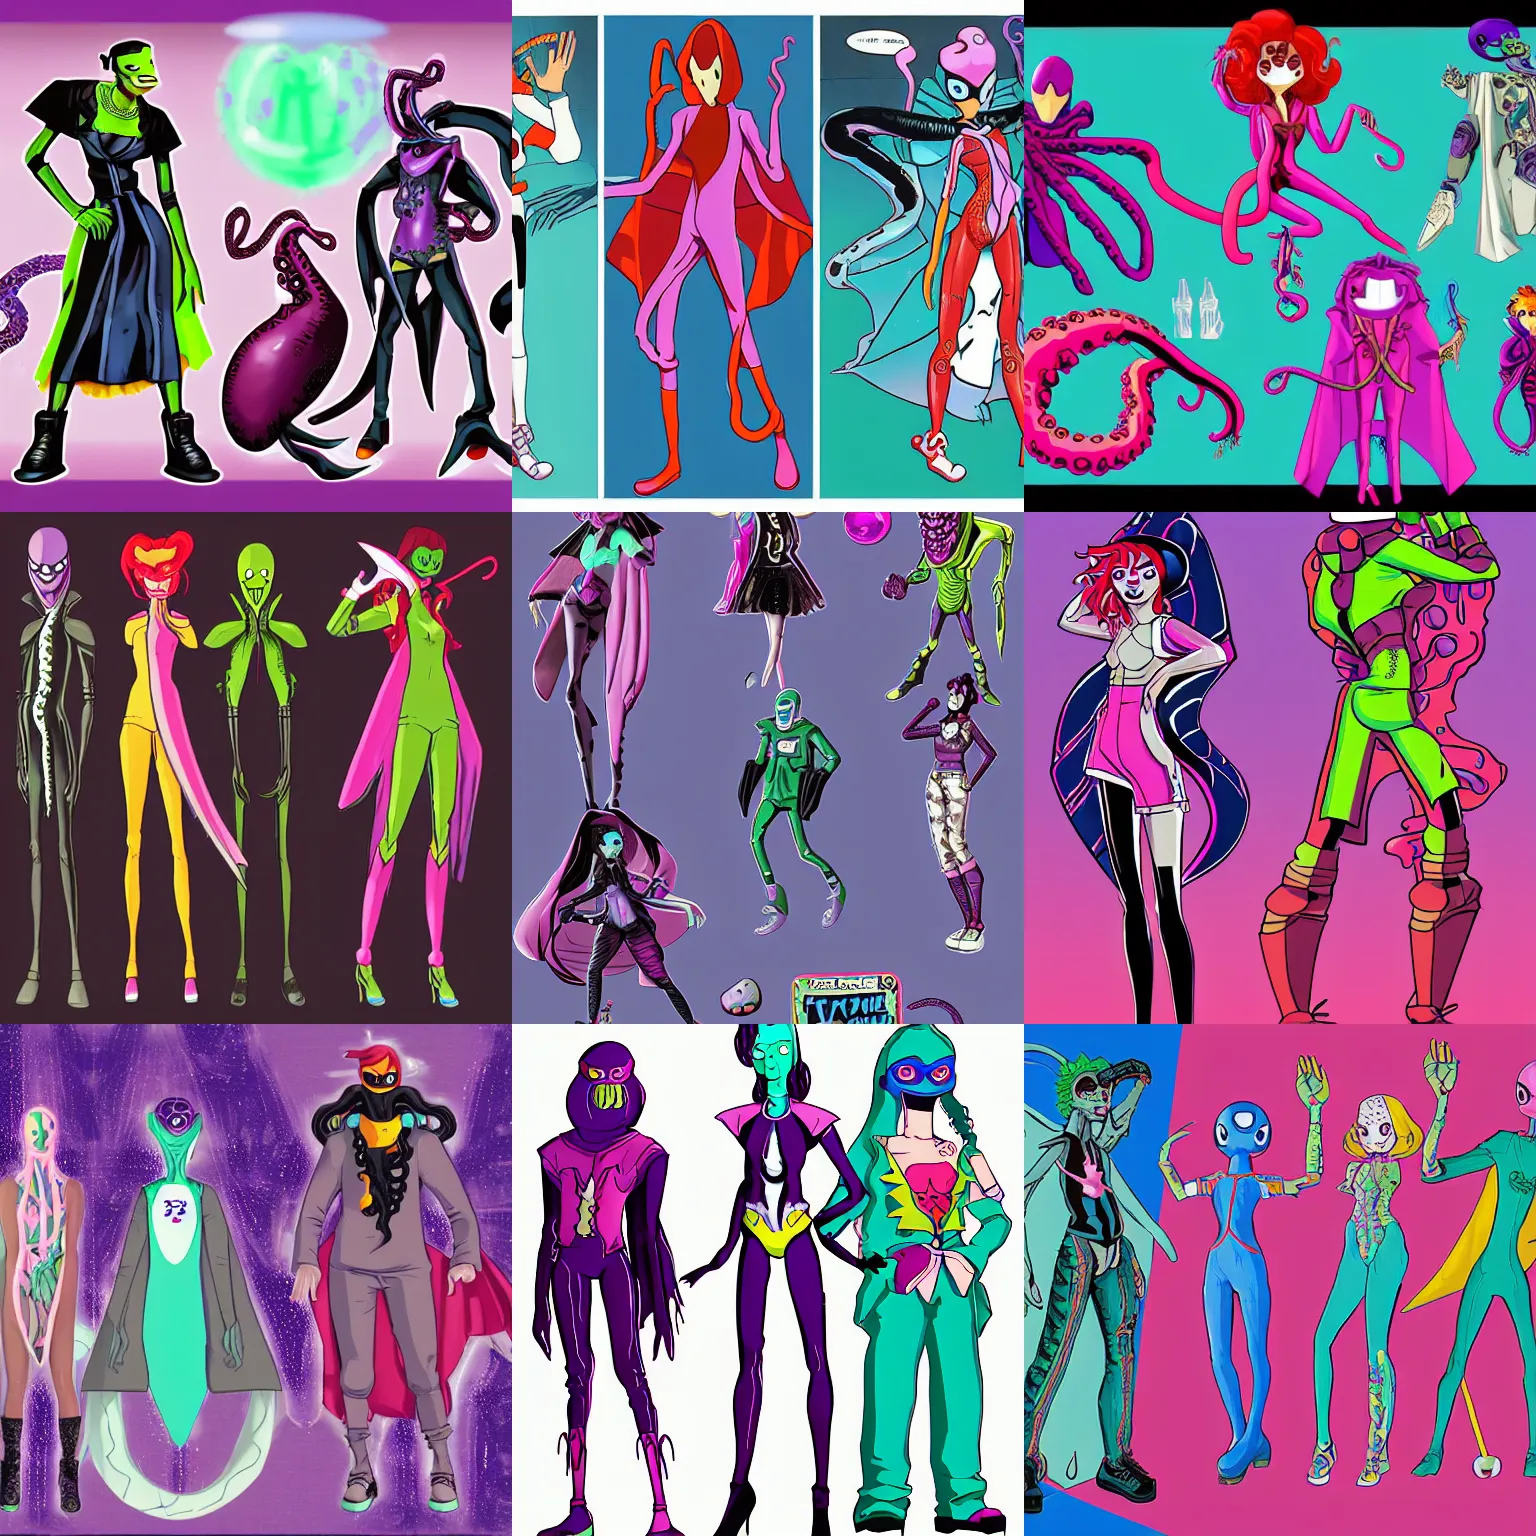 Prompt: a vintage vaporwave colorful tall lean vampire aliens with big black alien eyes and a squid beak with three webbed tentacle arms and skinny thin human legs wearing ninja garb based on vampire cloaks as playable characters design sheets that focuses on an ocean setting with help Lauren faust from her work on dc superhero girls and lead artist Andy Suriano from rise of the teenage mutant ninja turtles on nickelodeon using artistic cues for the game fret nice and art direction from the Sony 2018 animated film spiderverse